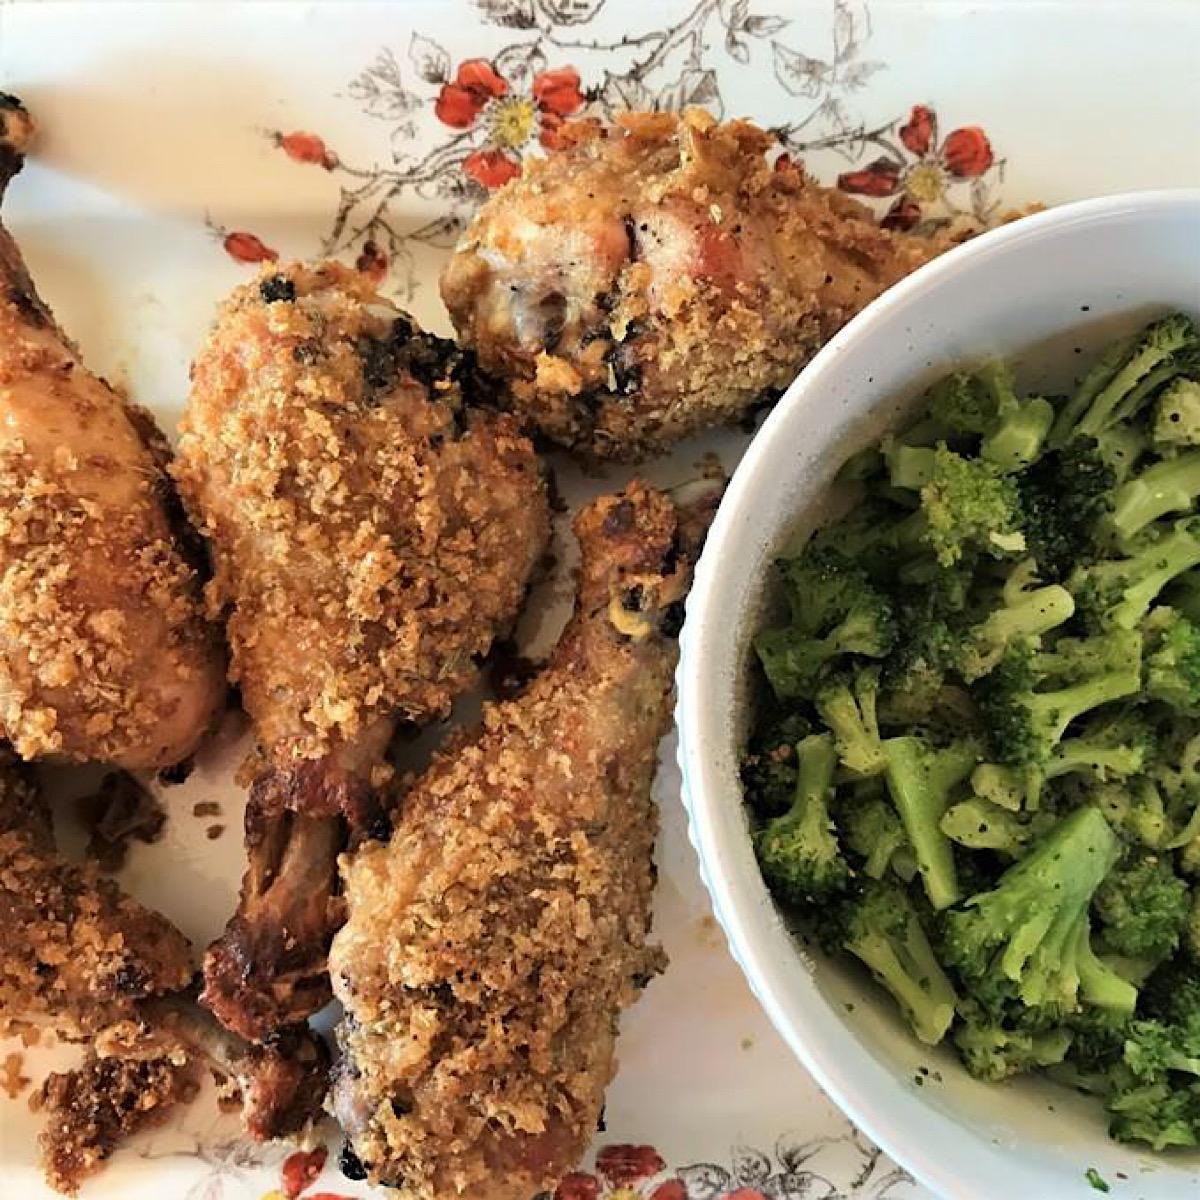 Keto “fried” chicken legs with side of broccoli